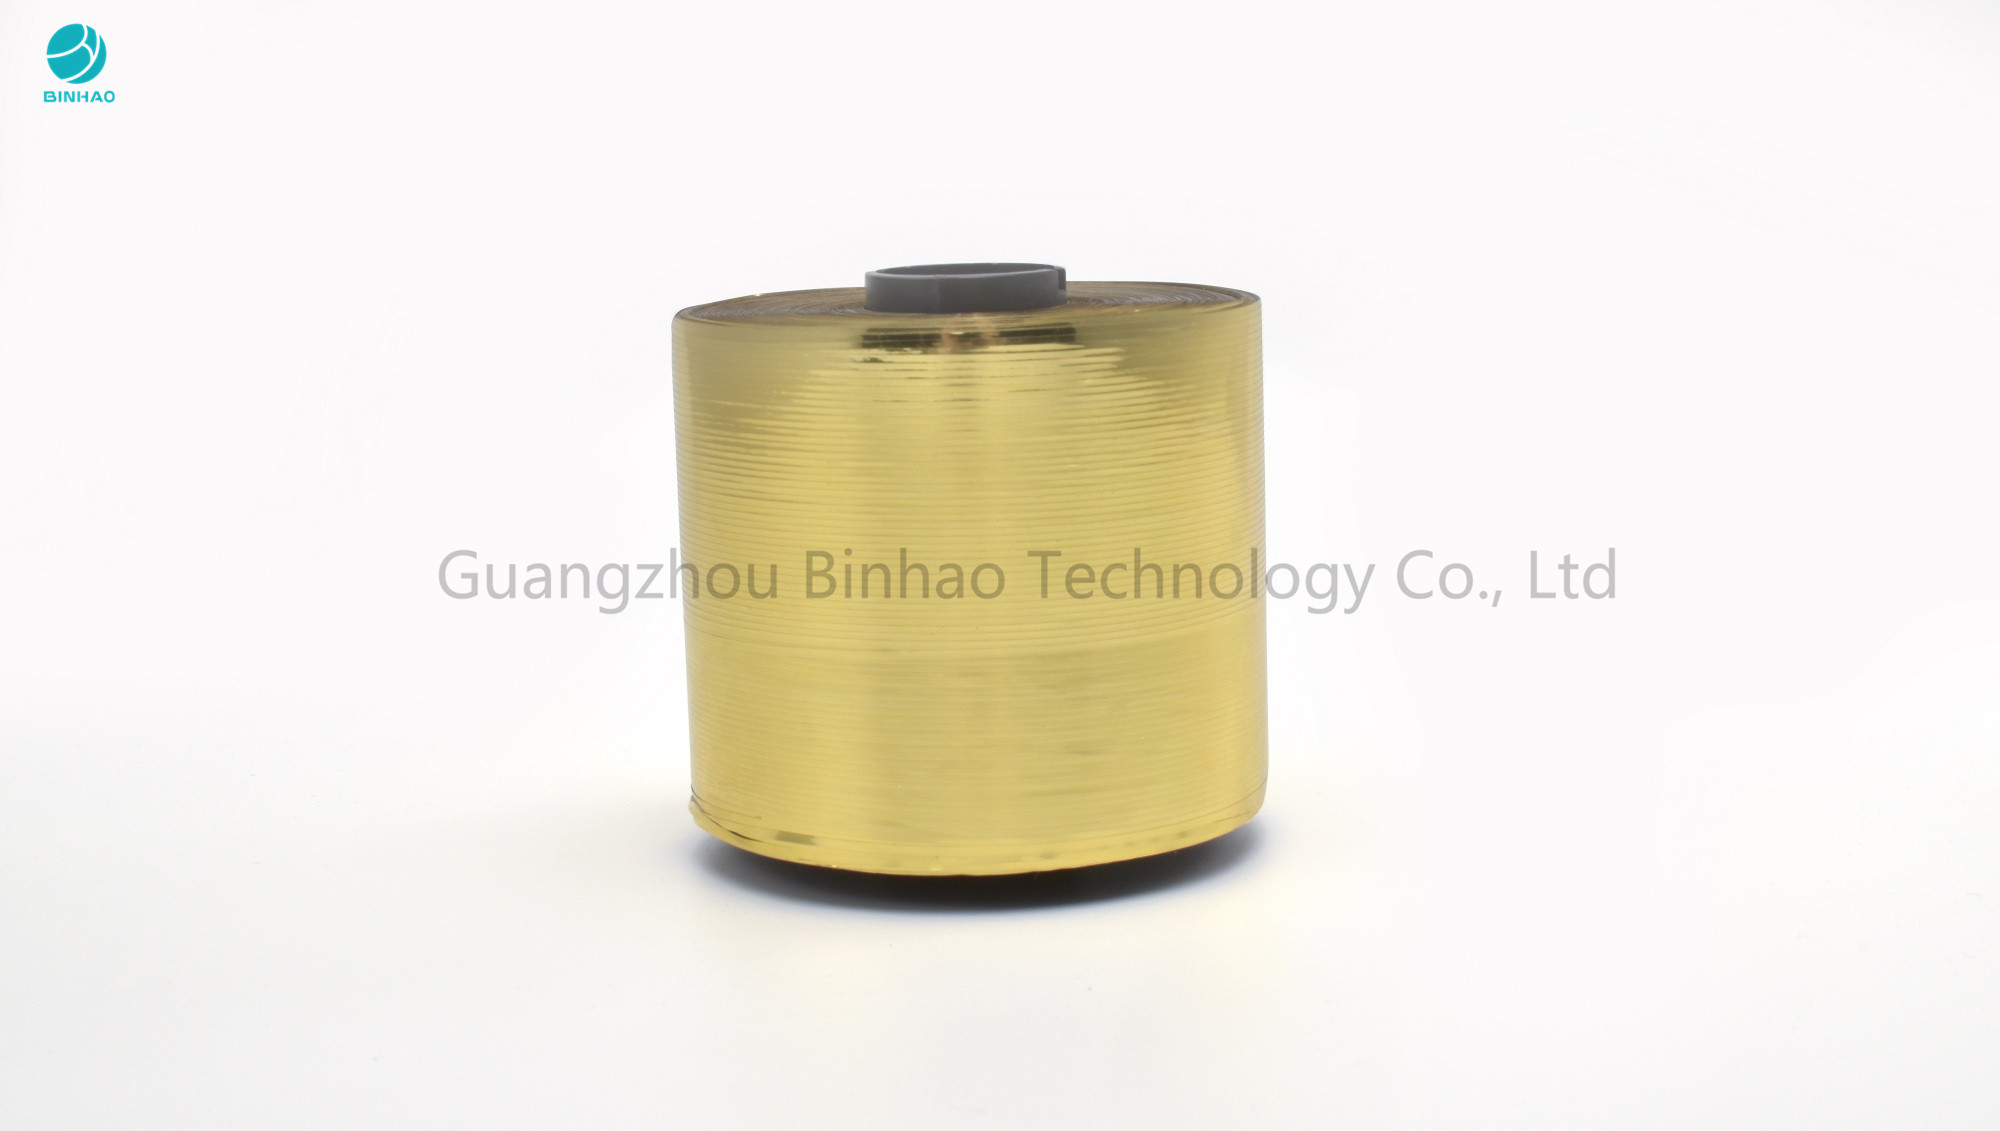 Gold Metallized Cigarette Packing Easy Tear Strip Self Adhesive Tape In 152mm ID Bobbin